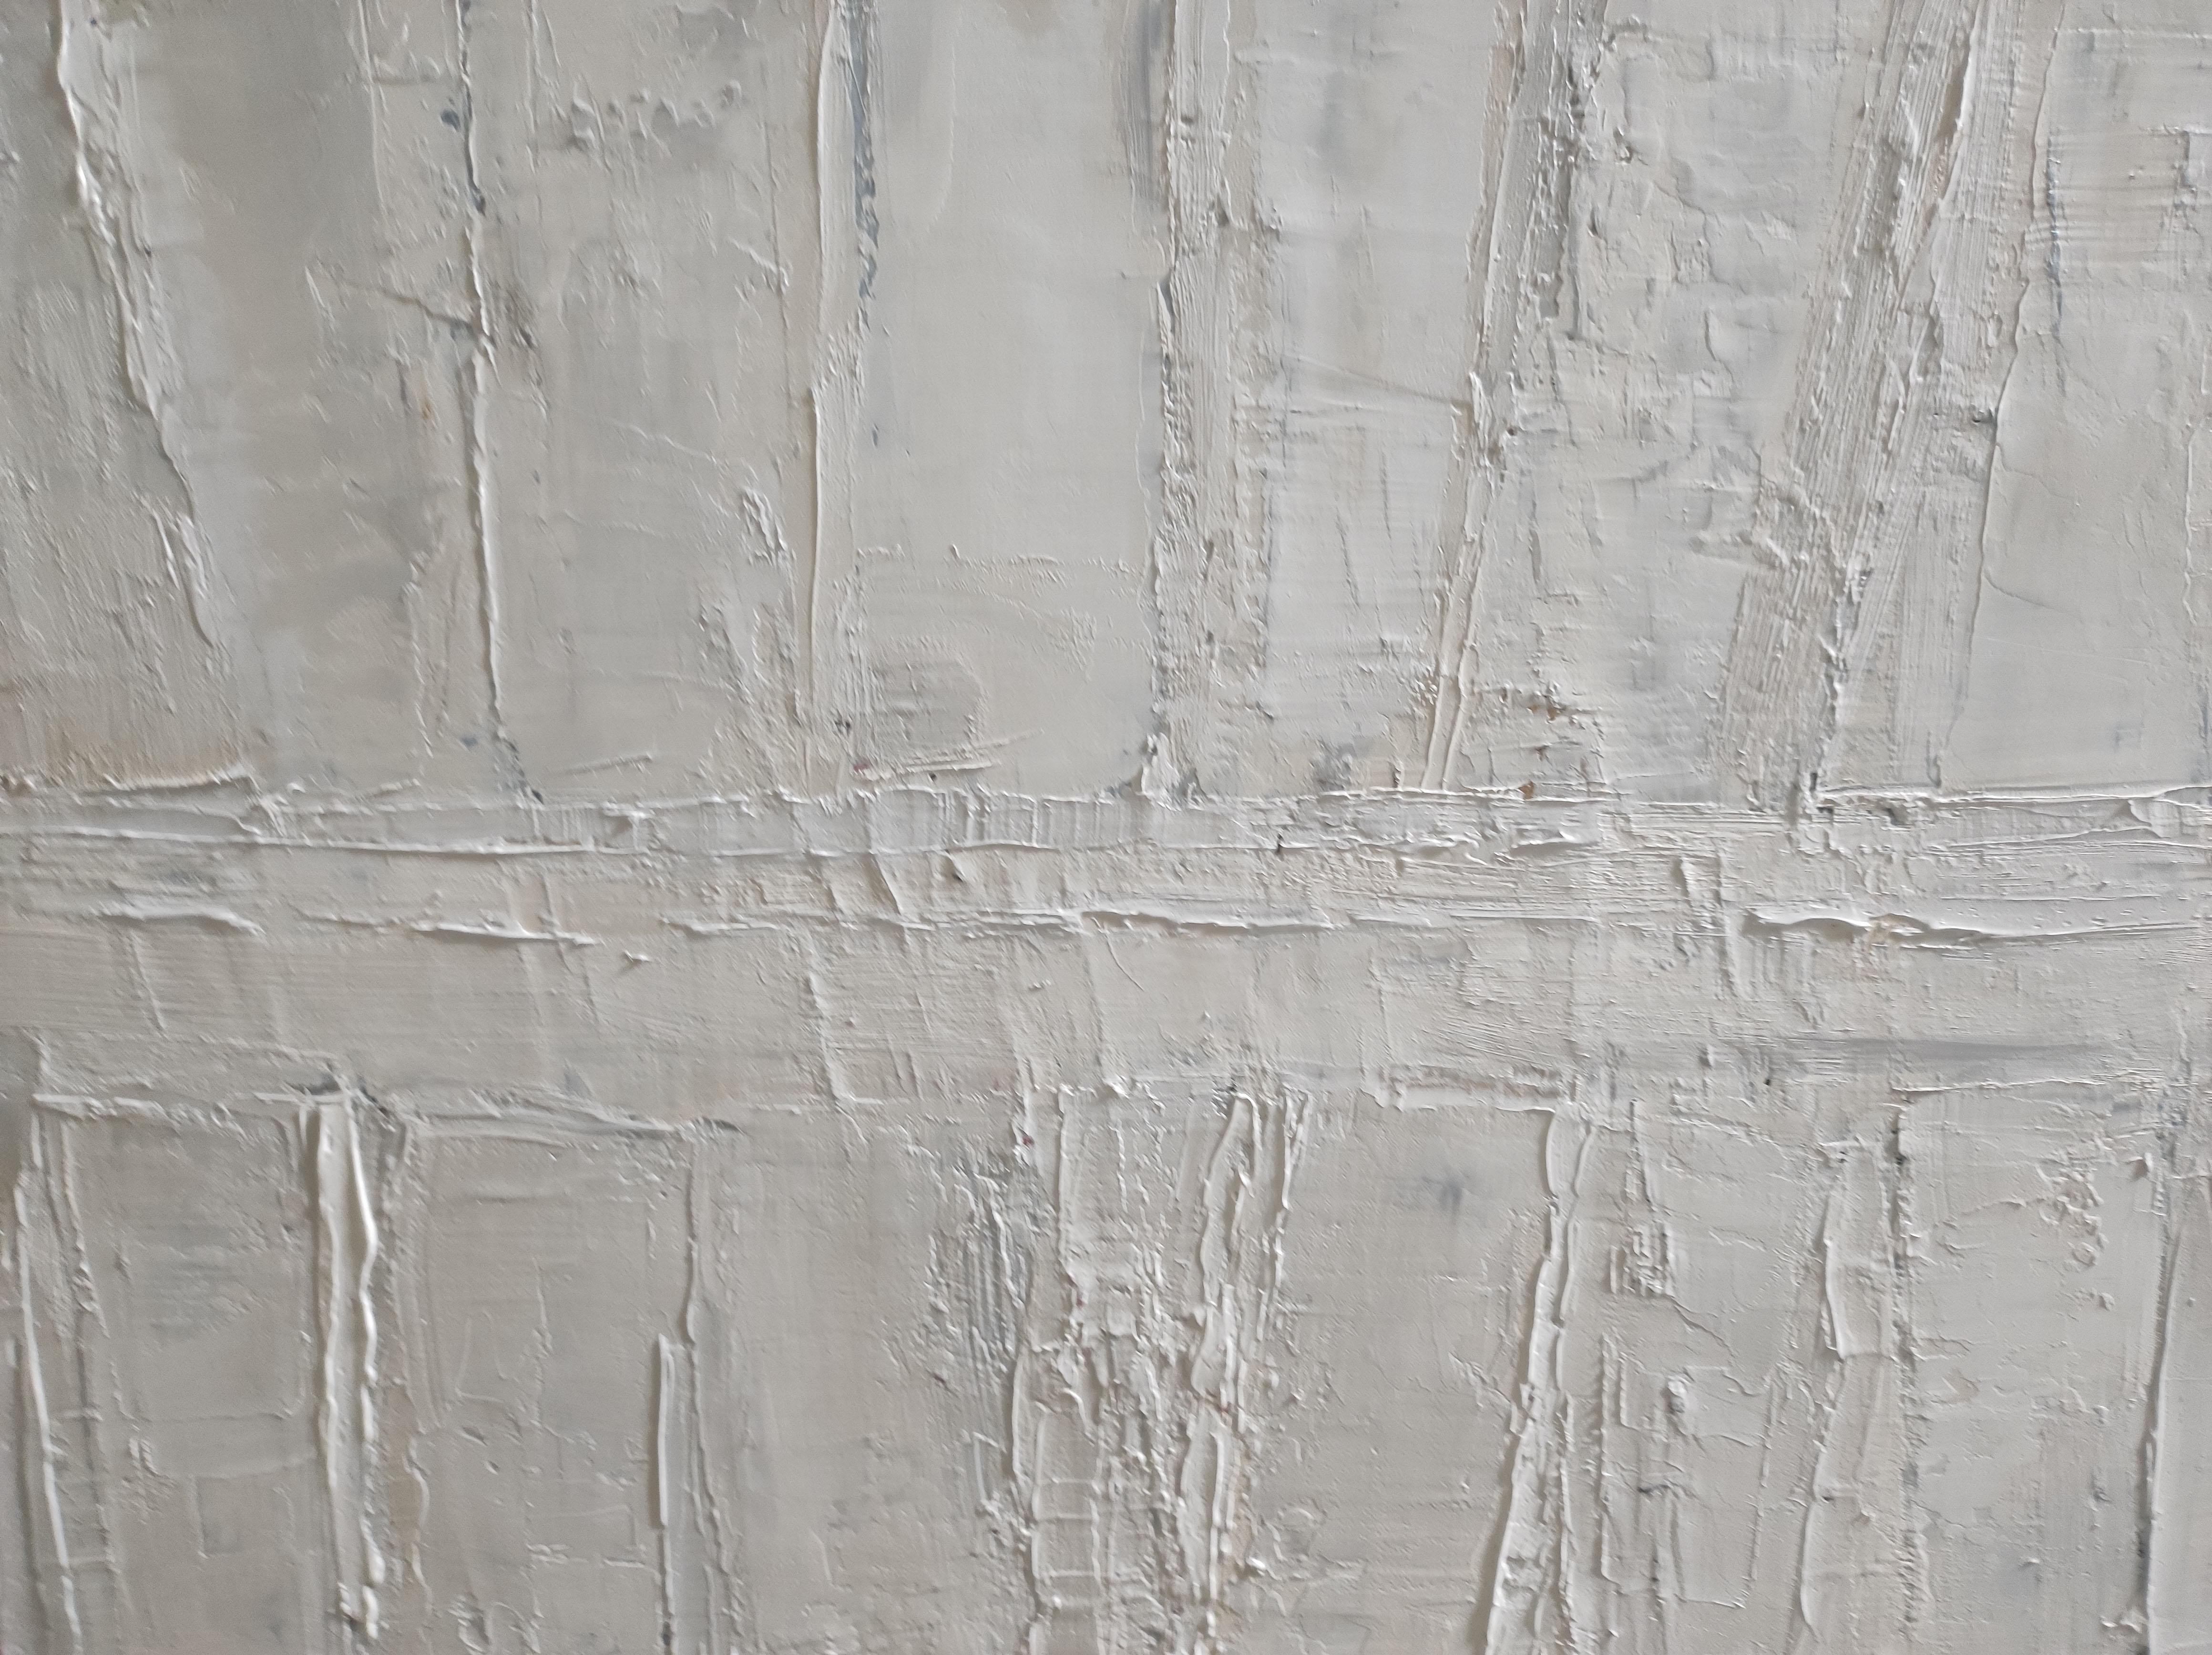 Abstraction of a bookcase in a shades of white treated like a stamping.
Oil on canvas worked with a knife with a multitude of layers bringing a beautiful texture and relief to the books.
Let the imagination work, the words have disappeared, only the